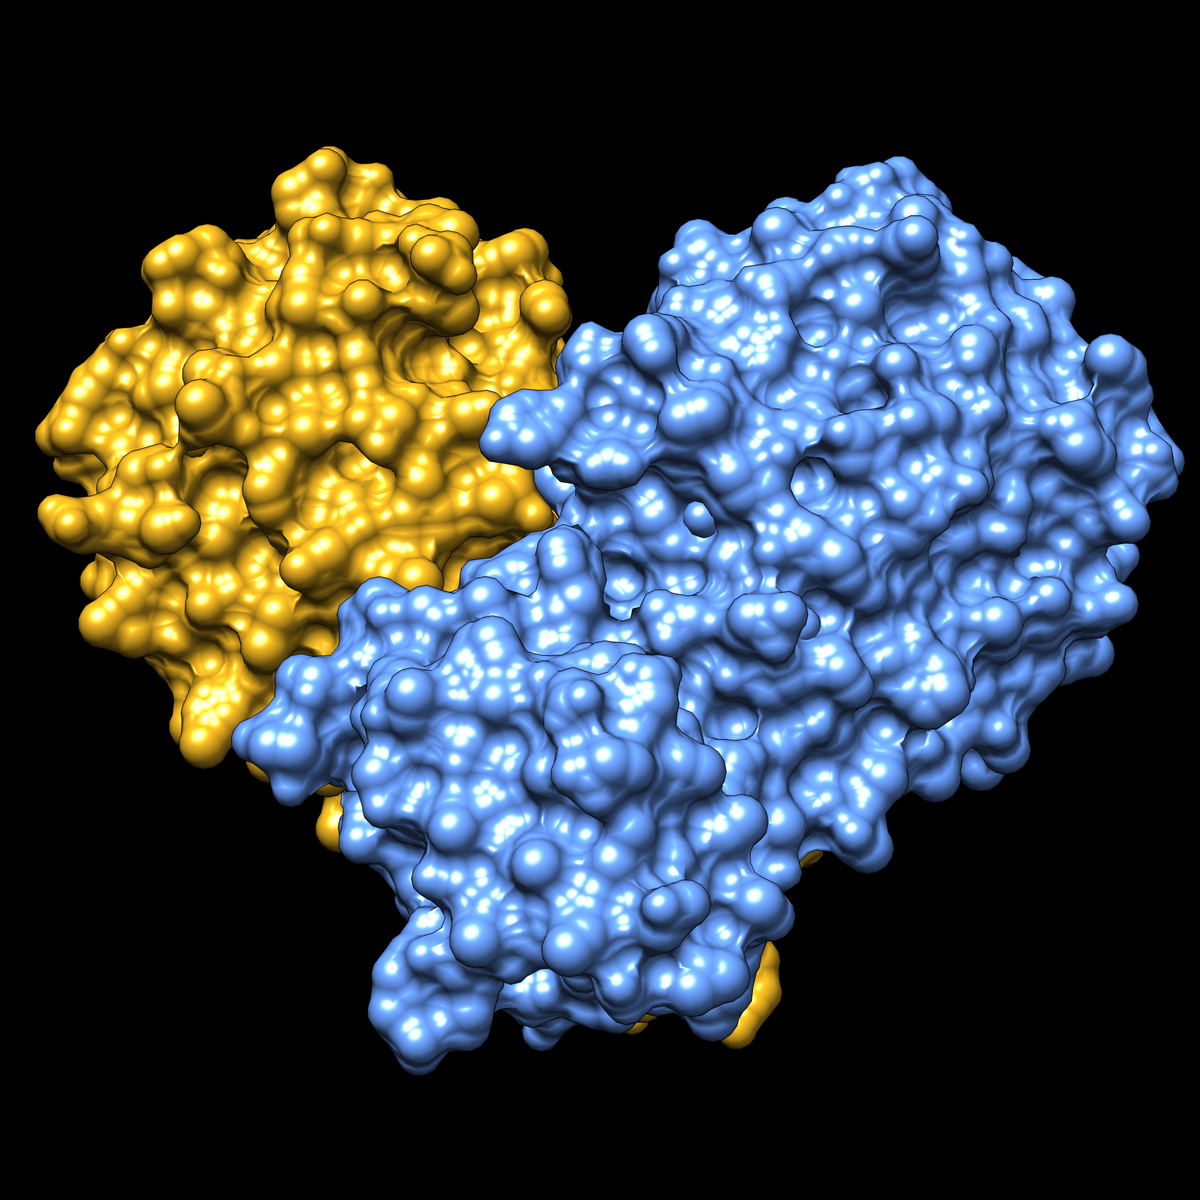 <a href="https://www.rcsb.org/structure/6LU7">PDB structure 6LU7</a> of SARS-CoV-2 main protease<BR>
<a href="https://youtu.be/4aVLltbDCKc"><B>Video</B></a><P>

Shown in a surface representation, with the two halves of the dimer in yellow and blue.